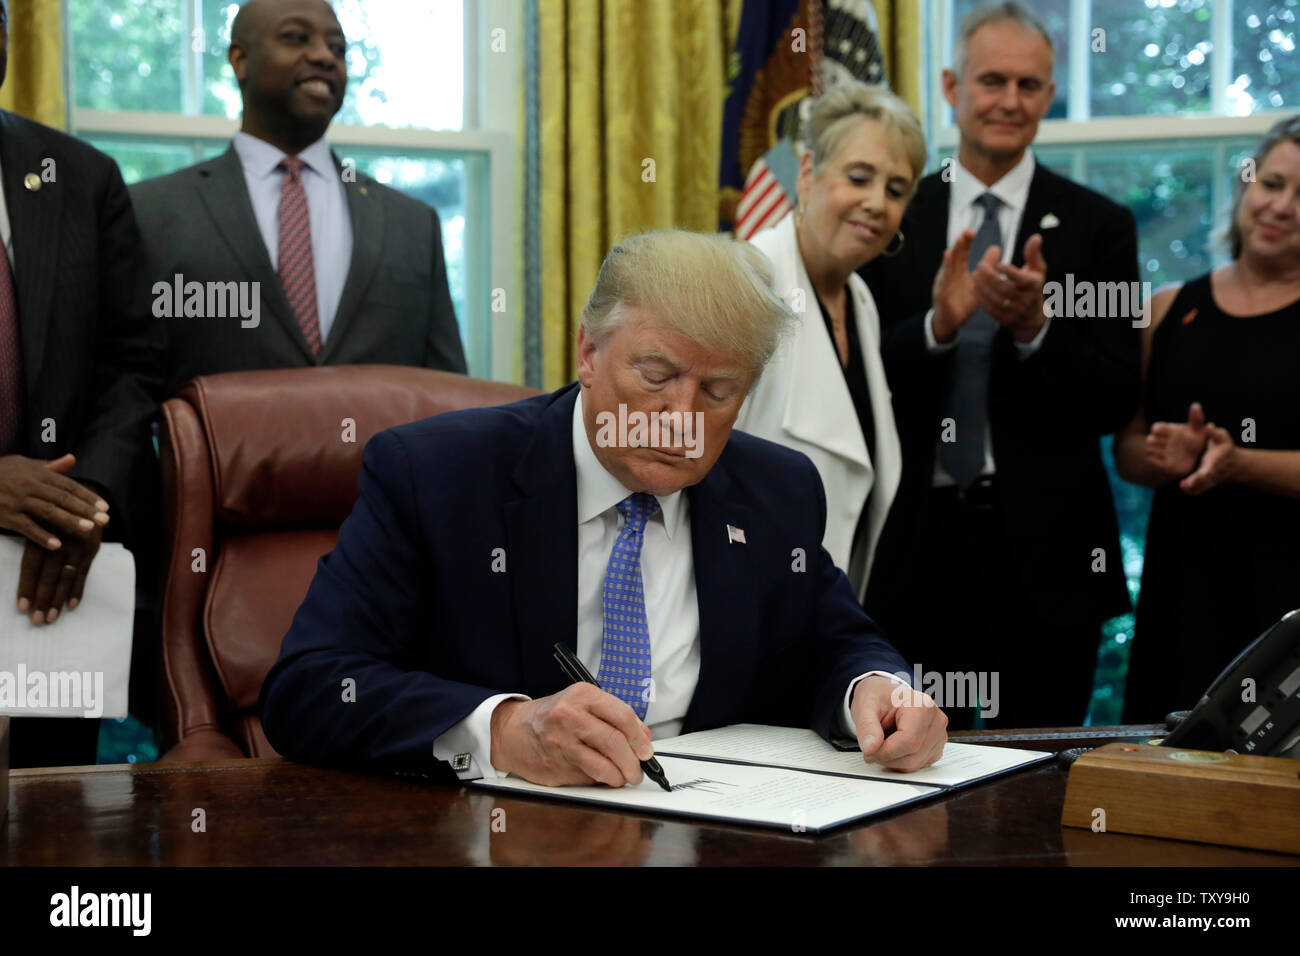 Washington, DC. 25th June, 2019. US President Donald Trump signs an Executive Order Establishing a White House Council on Eliminating Regulatory Barriers to Affordable Housing in the Oval Office at the White House in Washington, DC, on June 25, 2019. Credit: Yuri Gripas/Pool via CNP | usage worldwide Credit: dpa/Alamy Live News Stock Photo